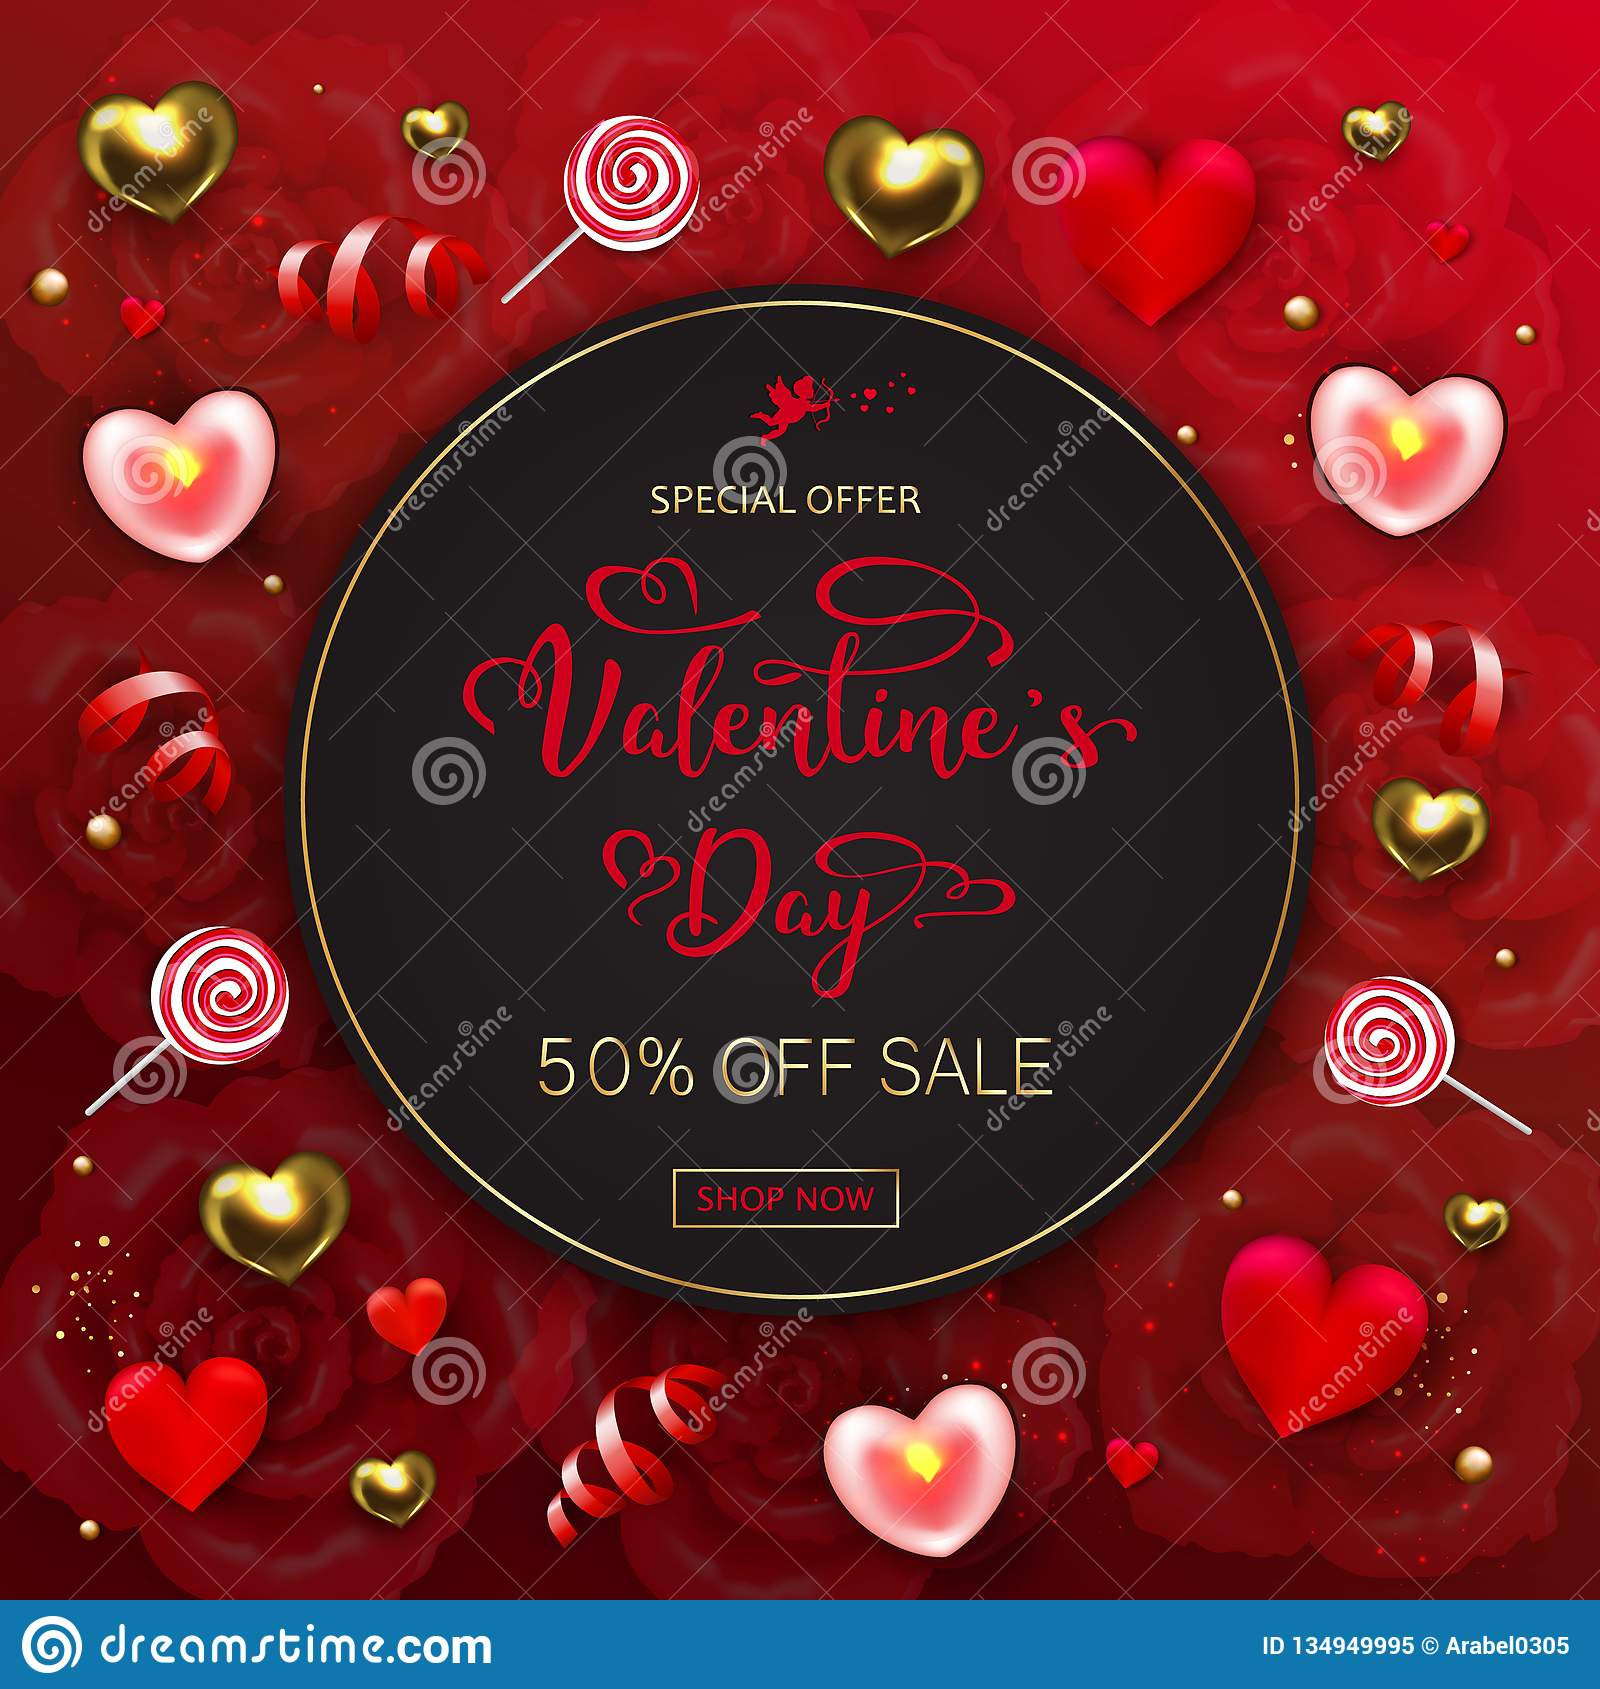 Valentines Day Candy Sale
 Valentines Day Sale Banner Vector Illustration With Candy